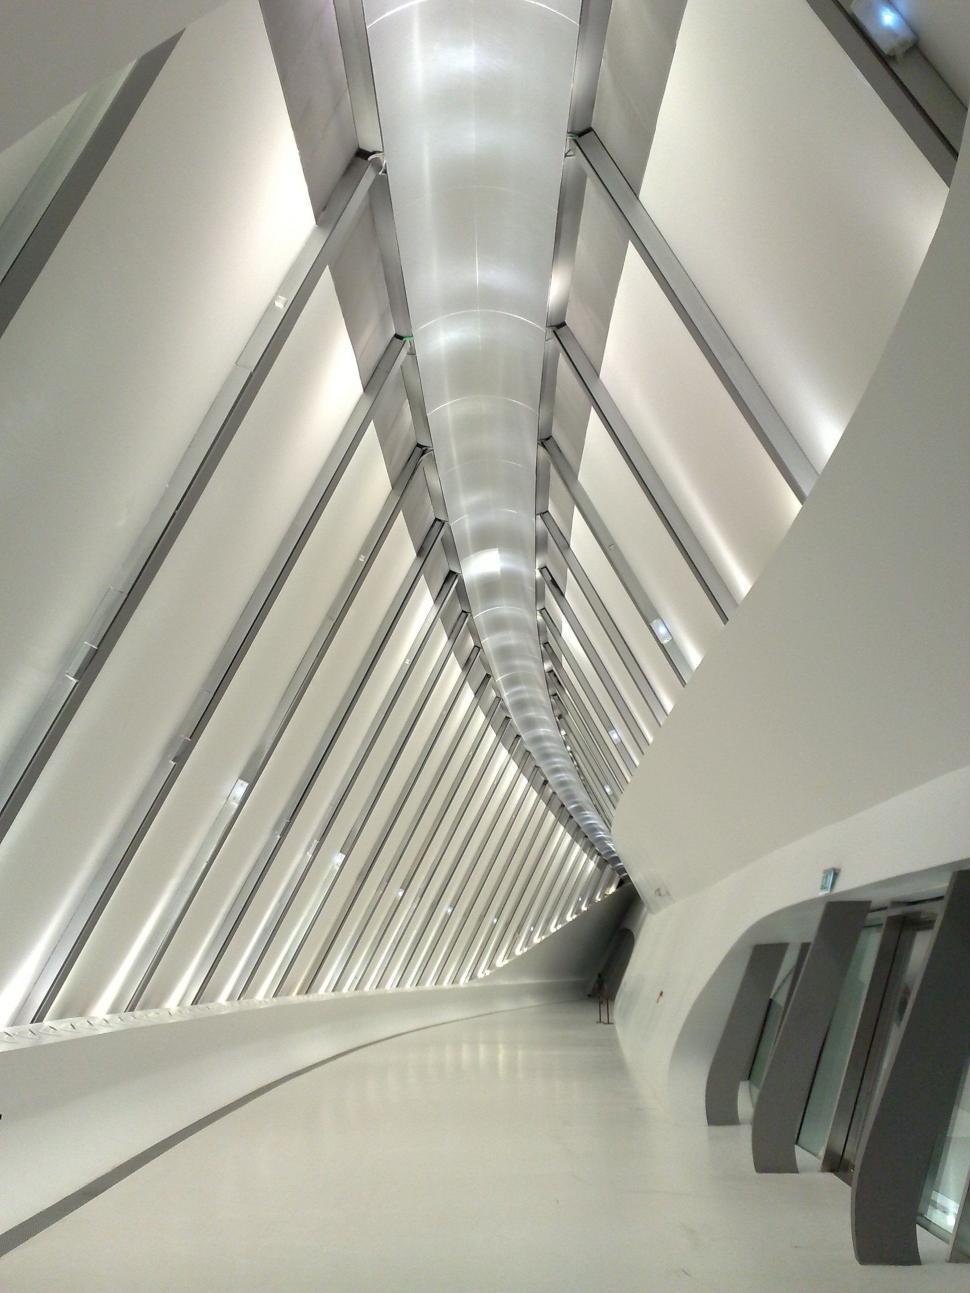 Free Image of A Never-Ending Hallway Stretching Into the Distance 